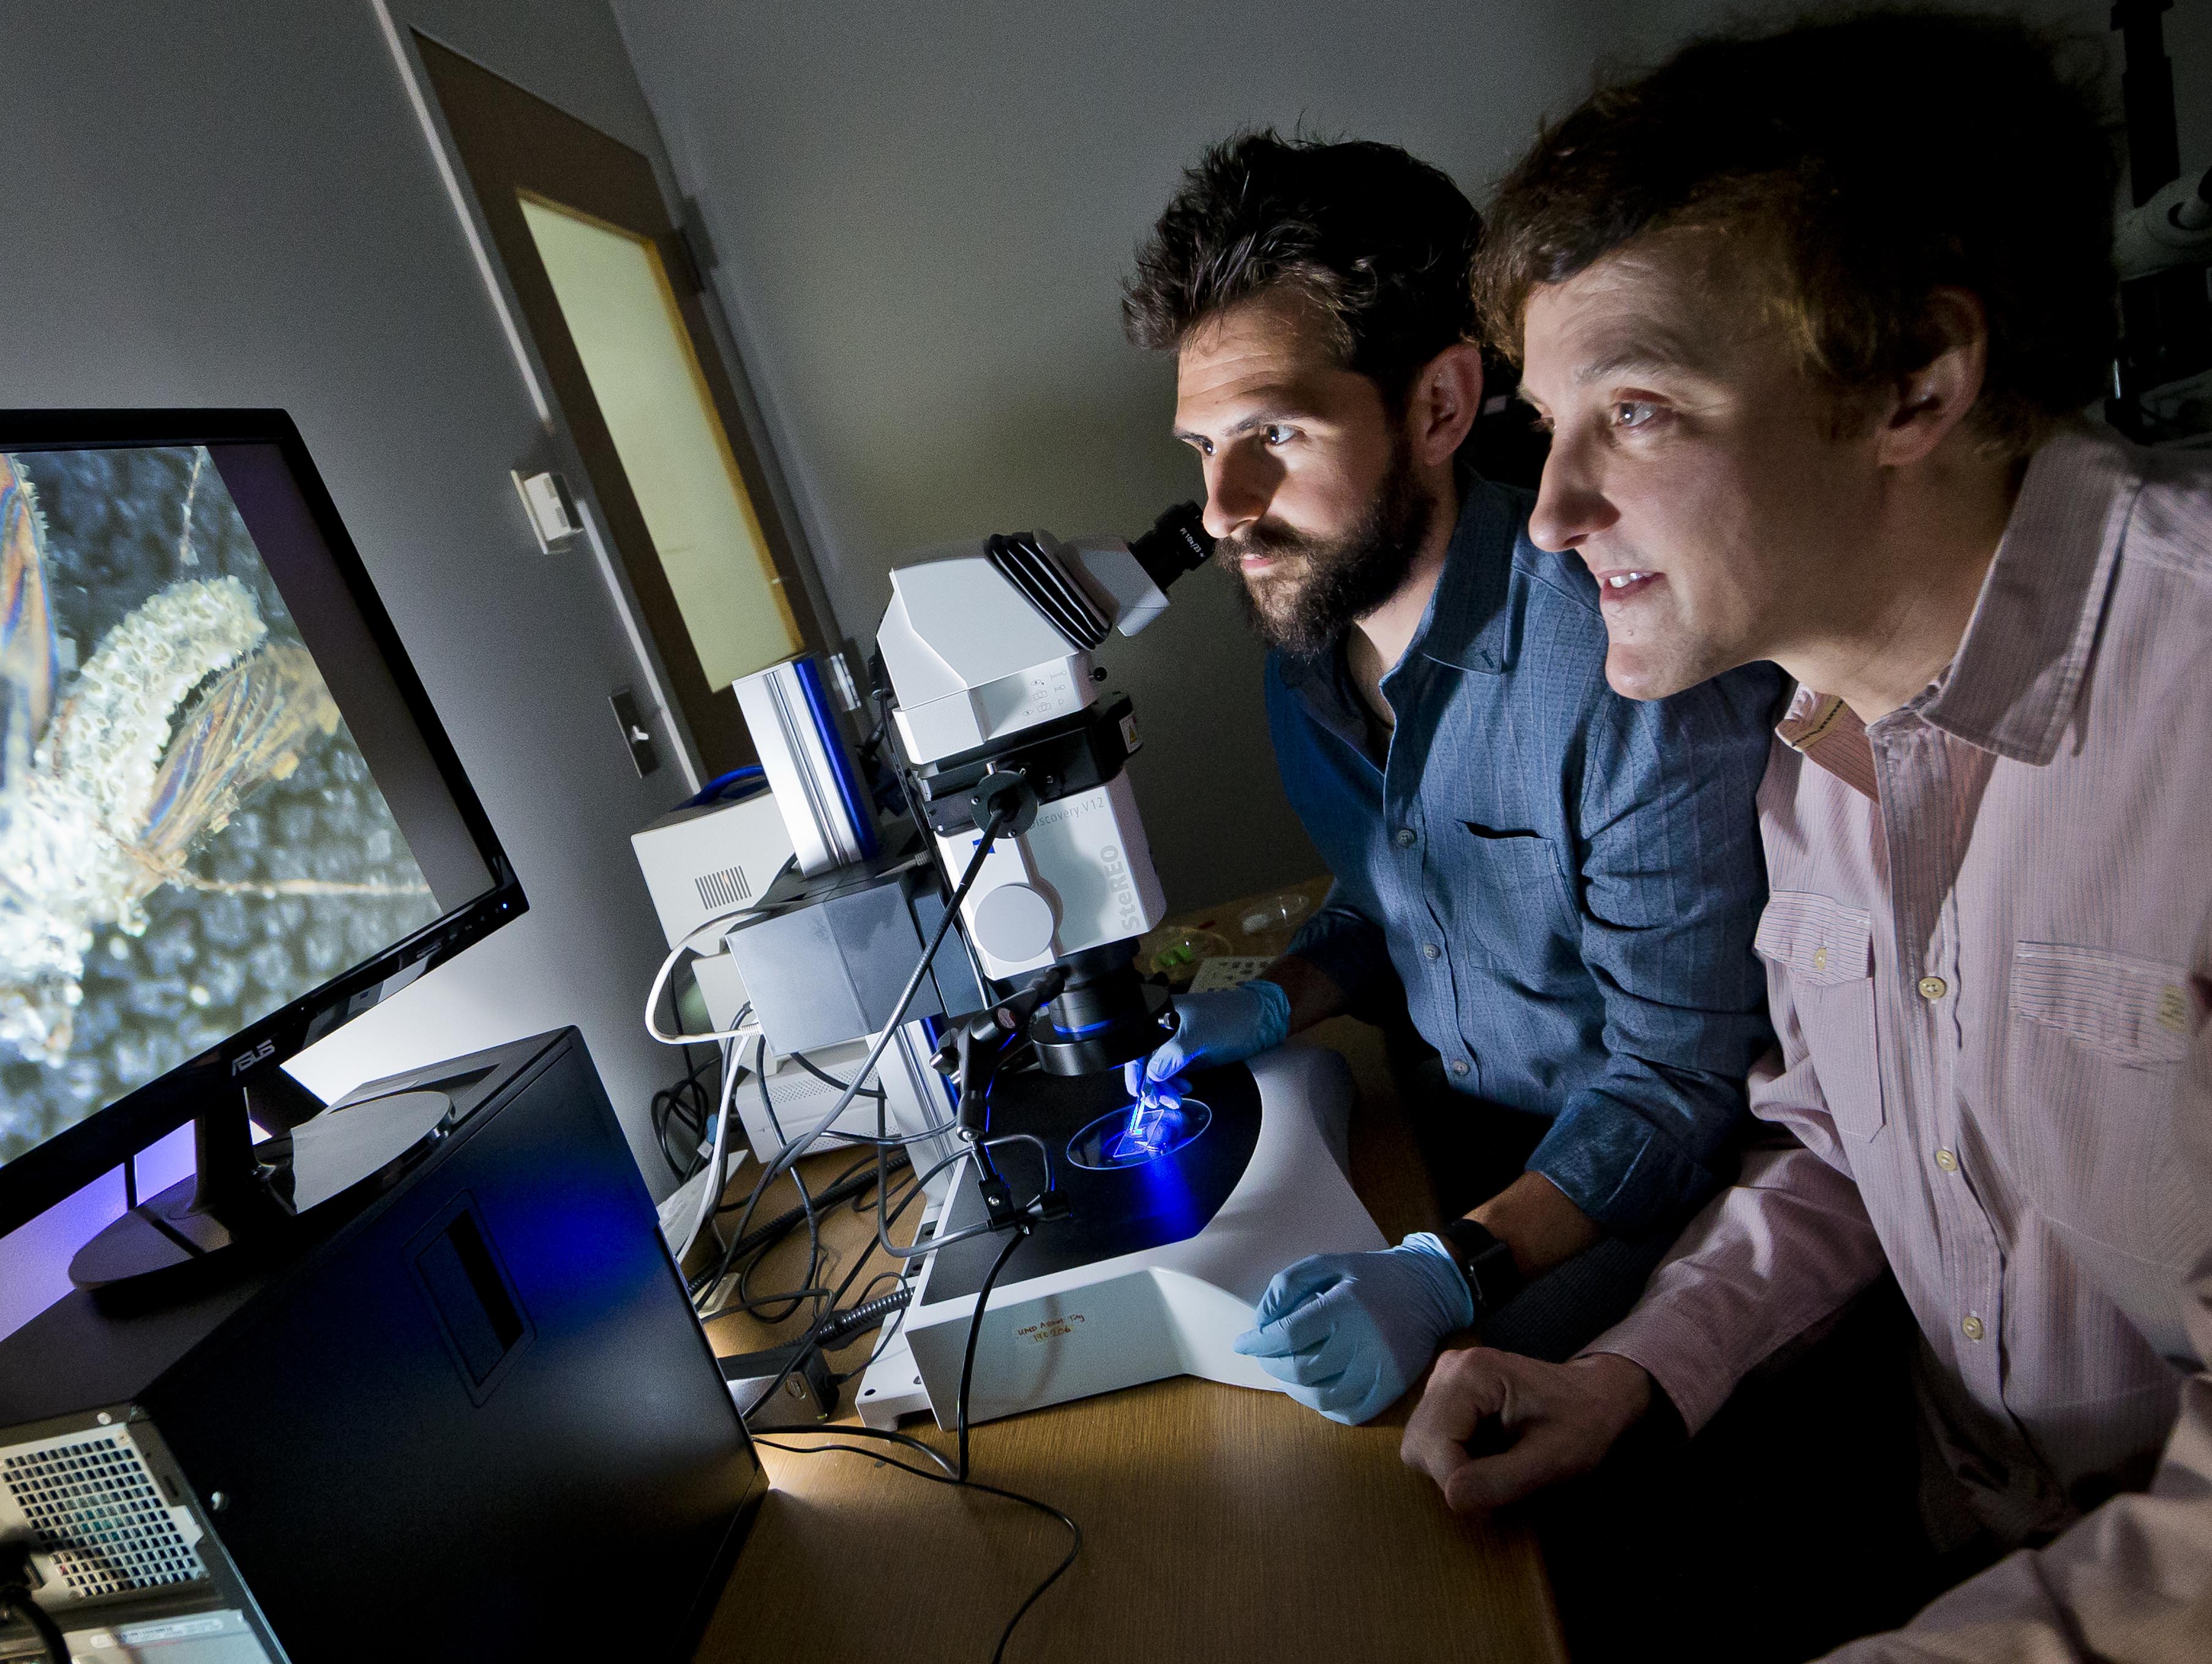 Professor Raymond St. Leger on the right and entomologist Brian Lovett examine a mosquito under the microscope. Their paper in the journal Science describing the development and testing of a transgenic fungus to control malaria mosquitos was awarded the 2019 AAAS Newcomb Cleveland Prize. Photo Credit: John Consloli/University of Maryland